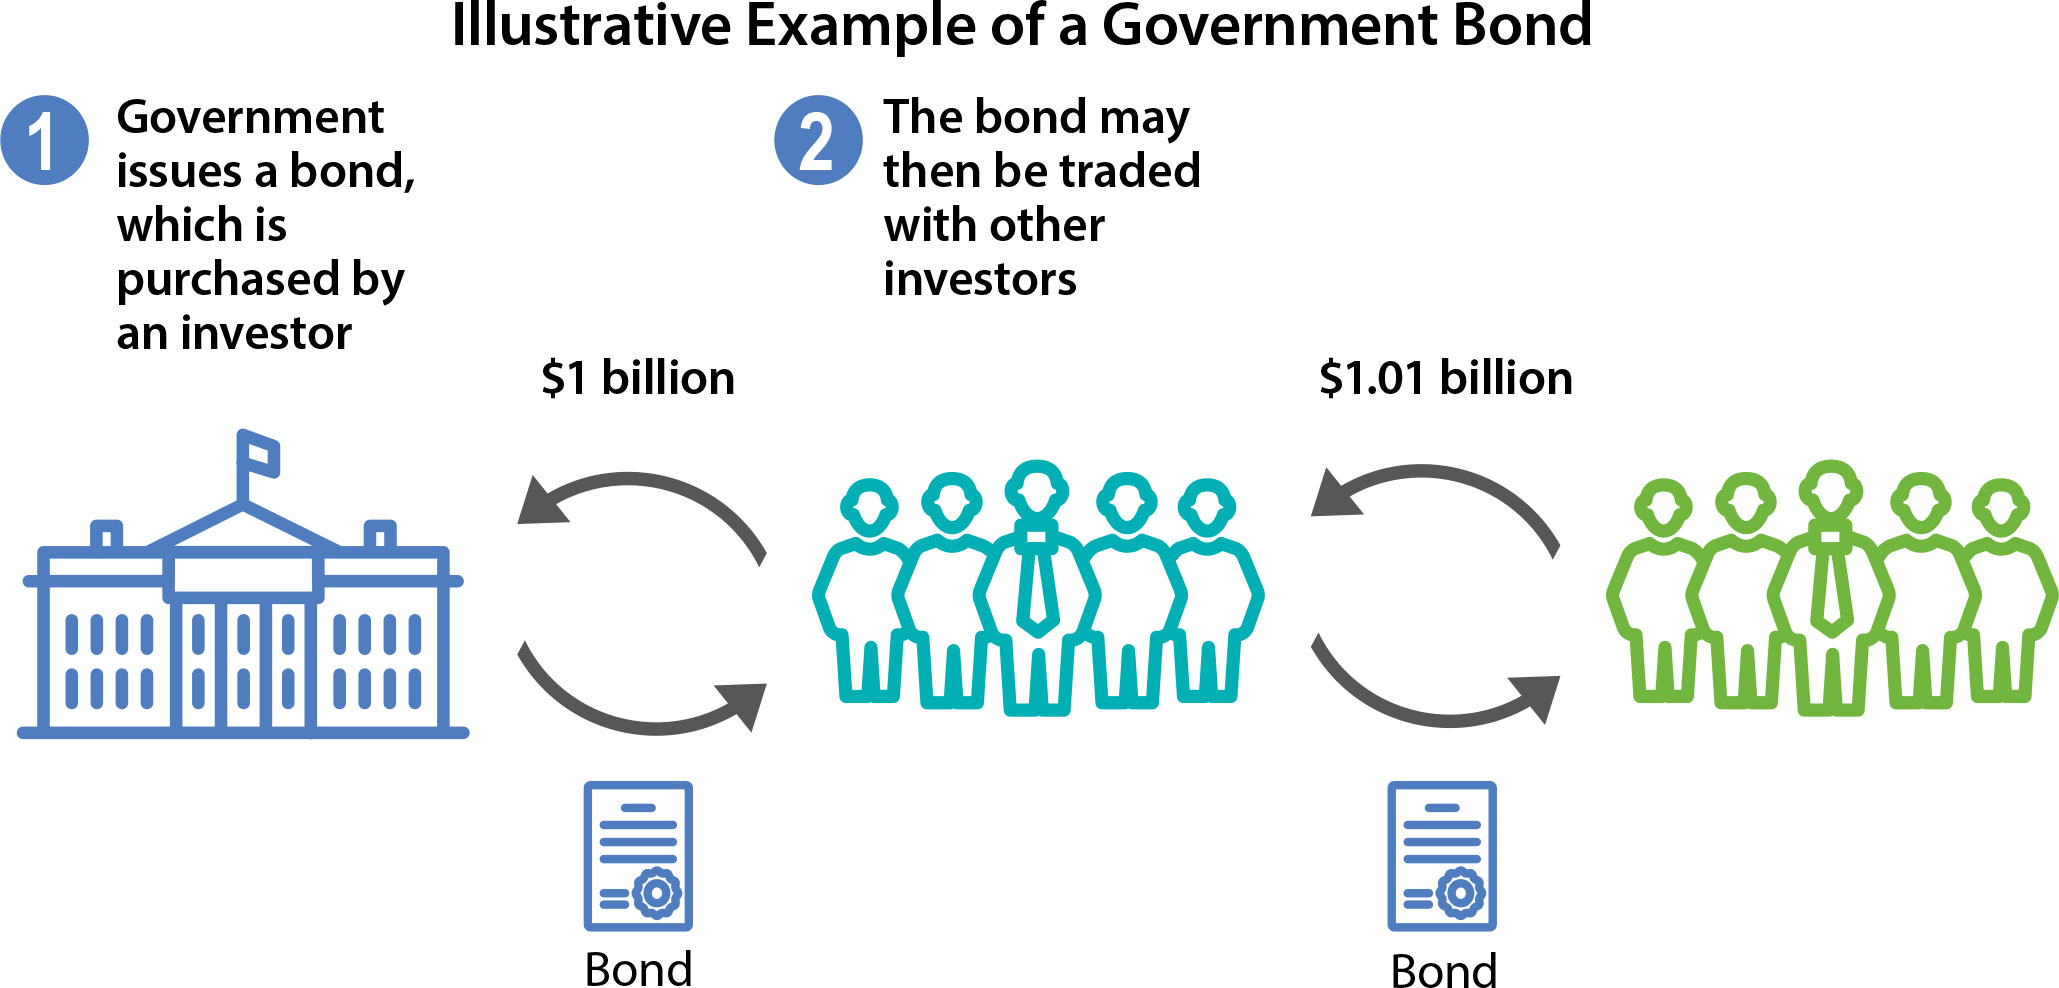 Image showing how a government issues a bond to an investor in return for funds and then how that investor is able to trade that bond with other investors.